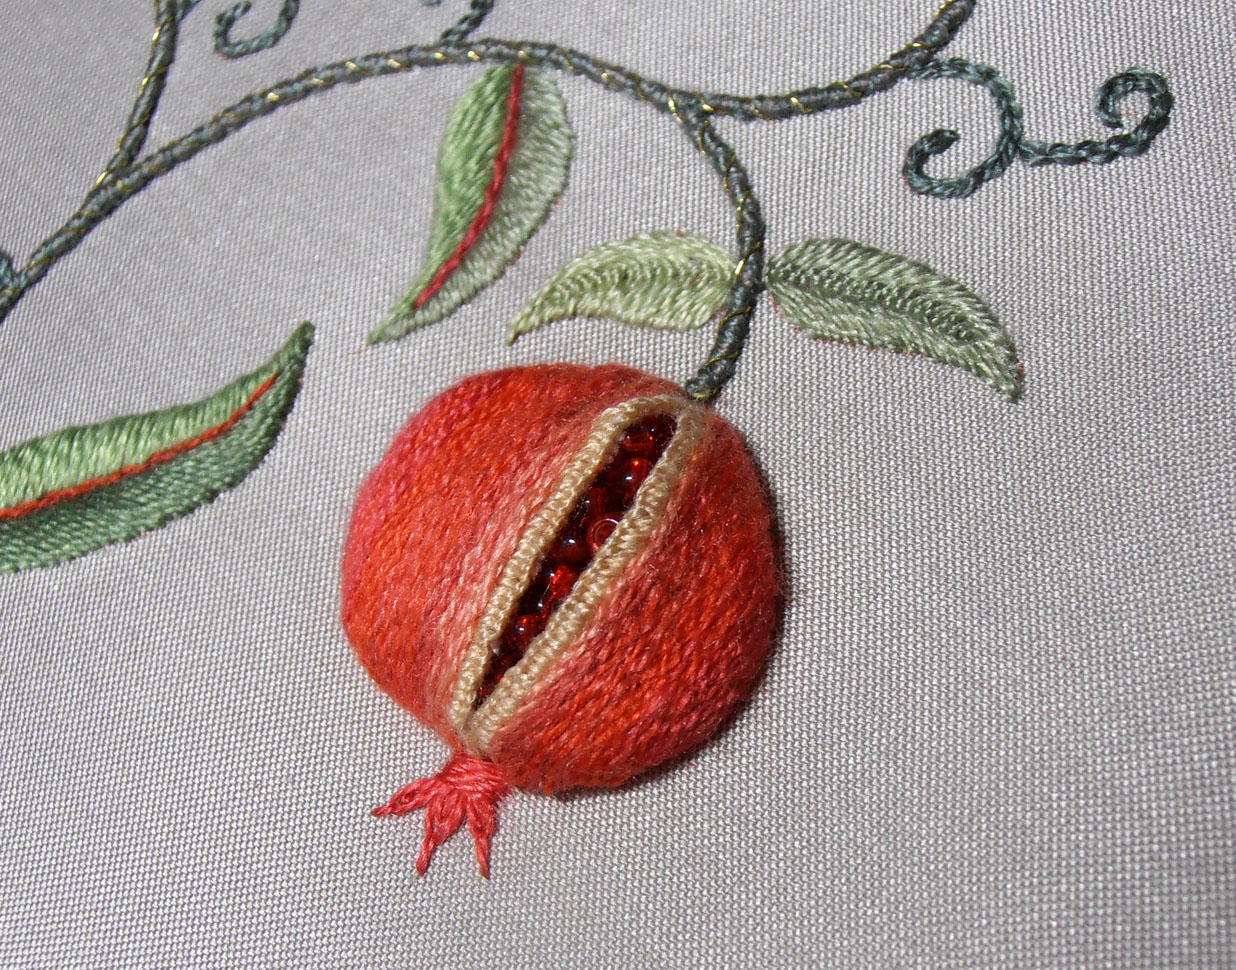 Crewel Embroidery Pomegranate—Finished!